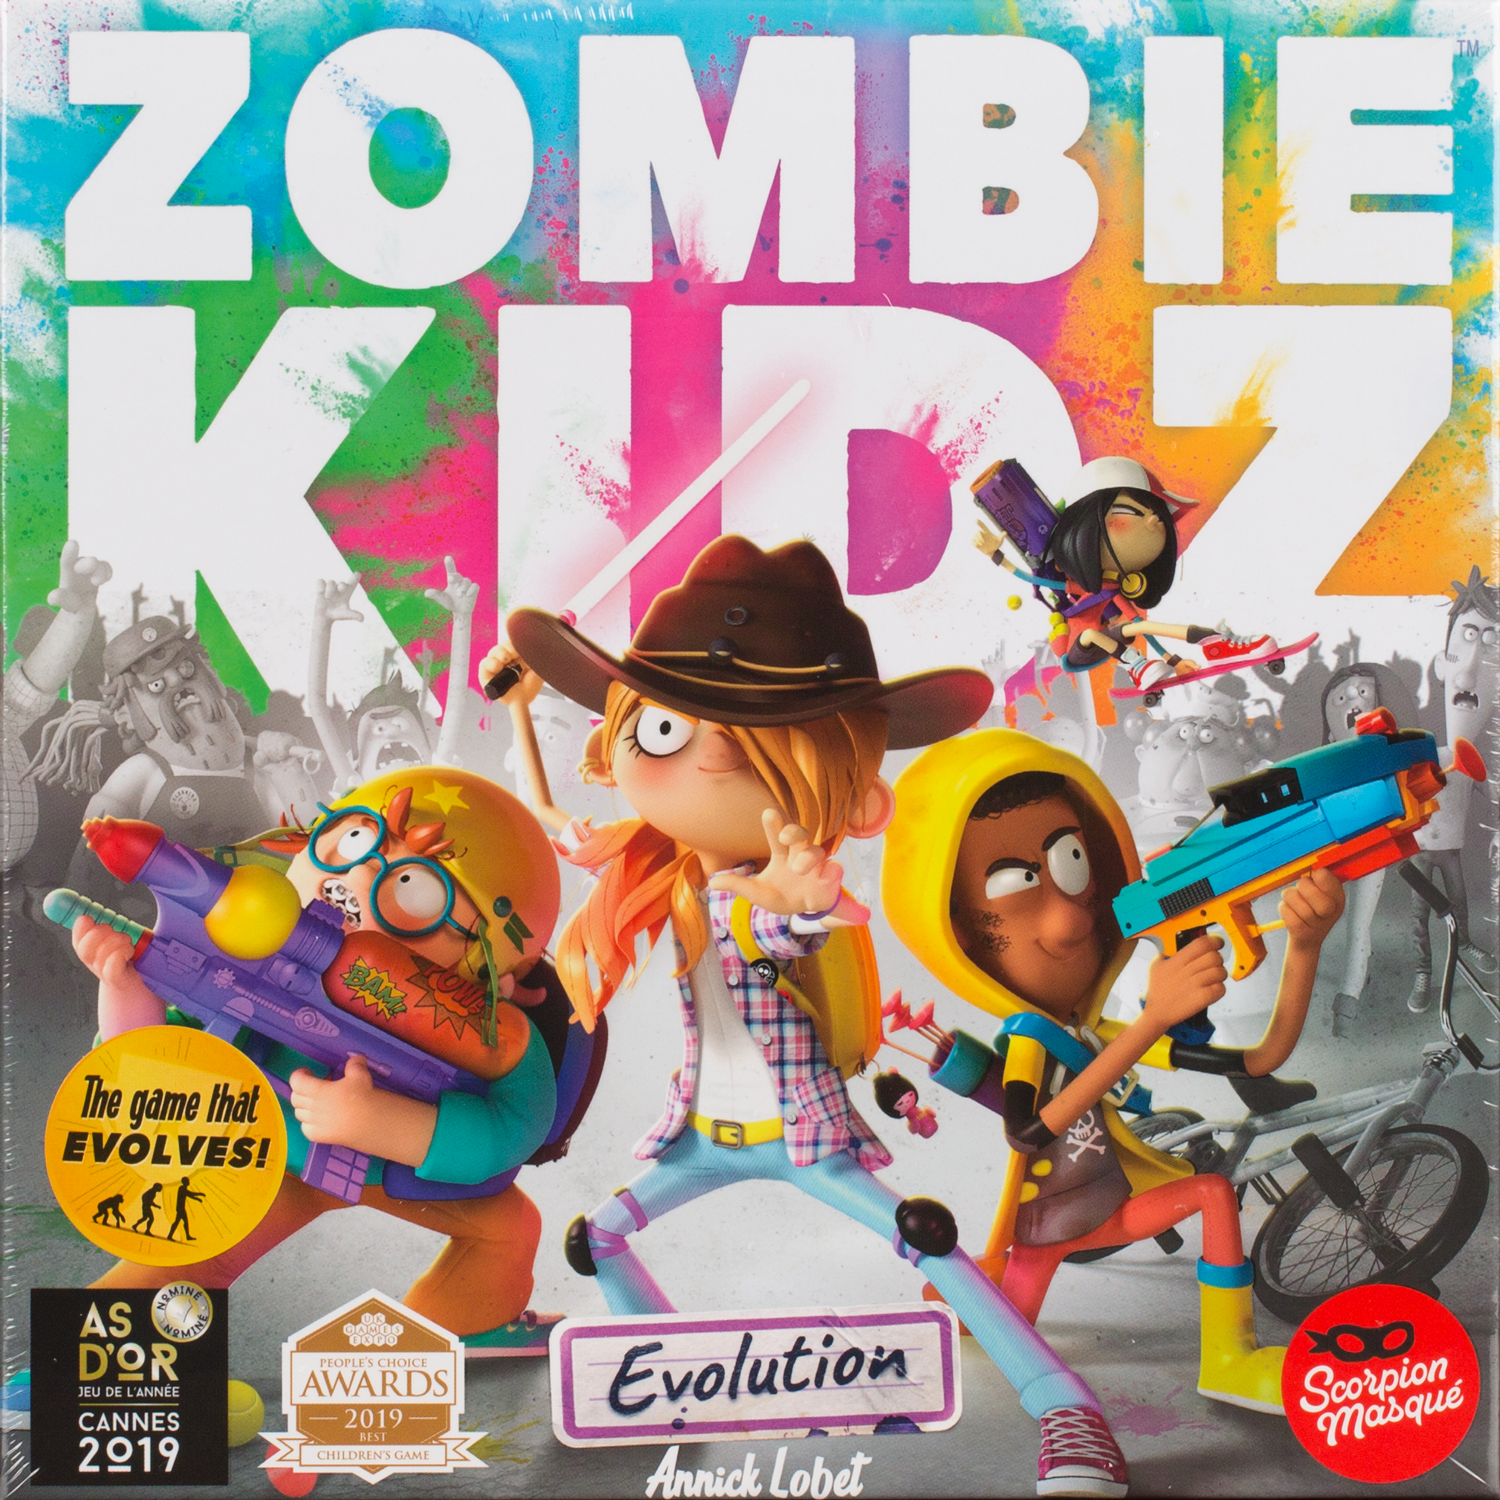 Zombie-Kidz-Evolution-01-buy-childrens-legacy-game-from-Out-of-Town-Games